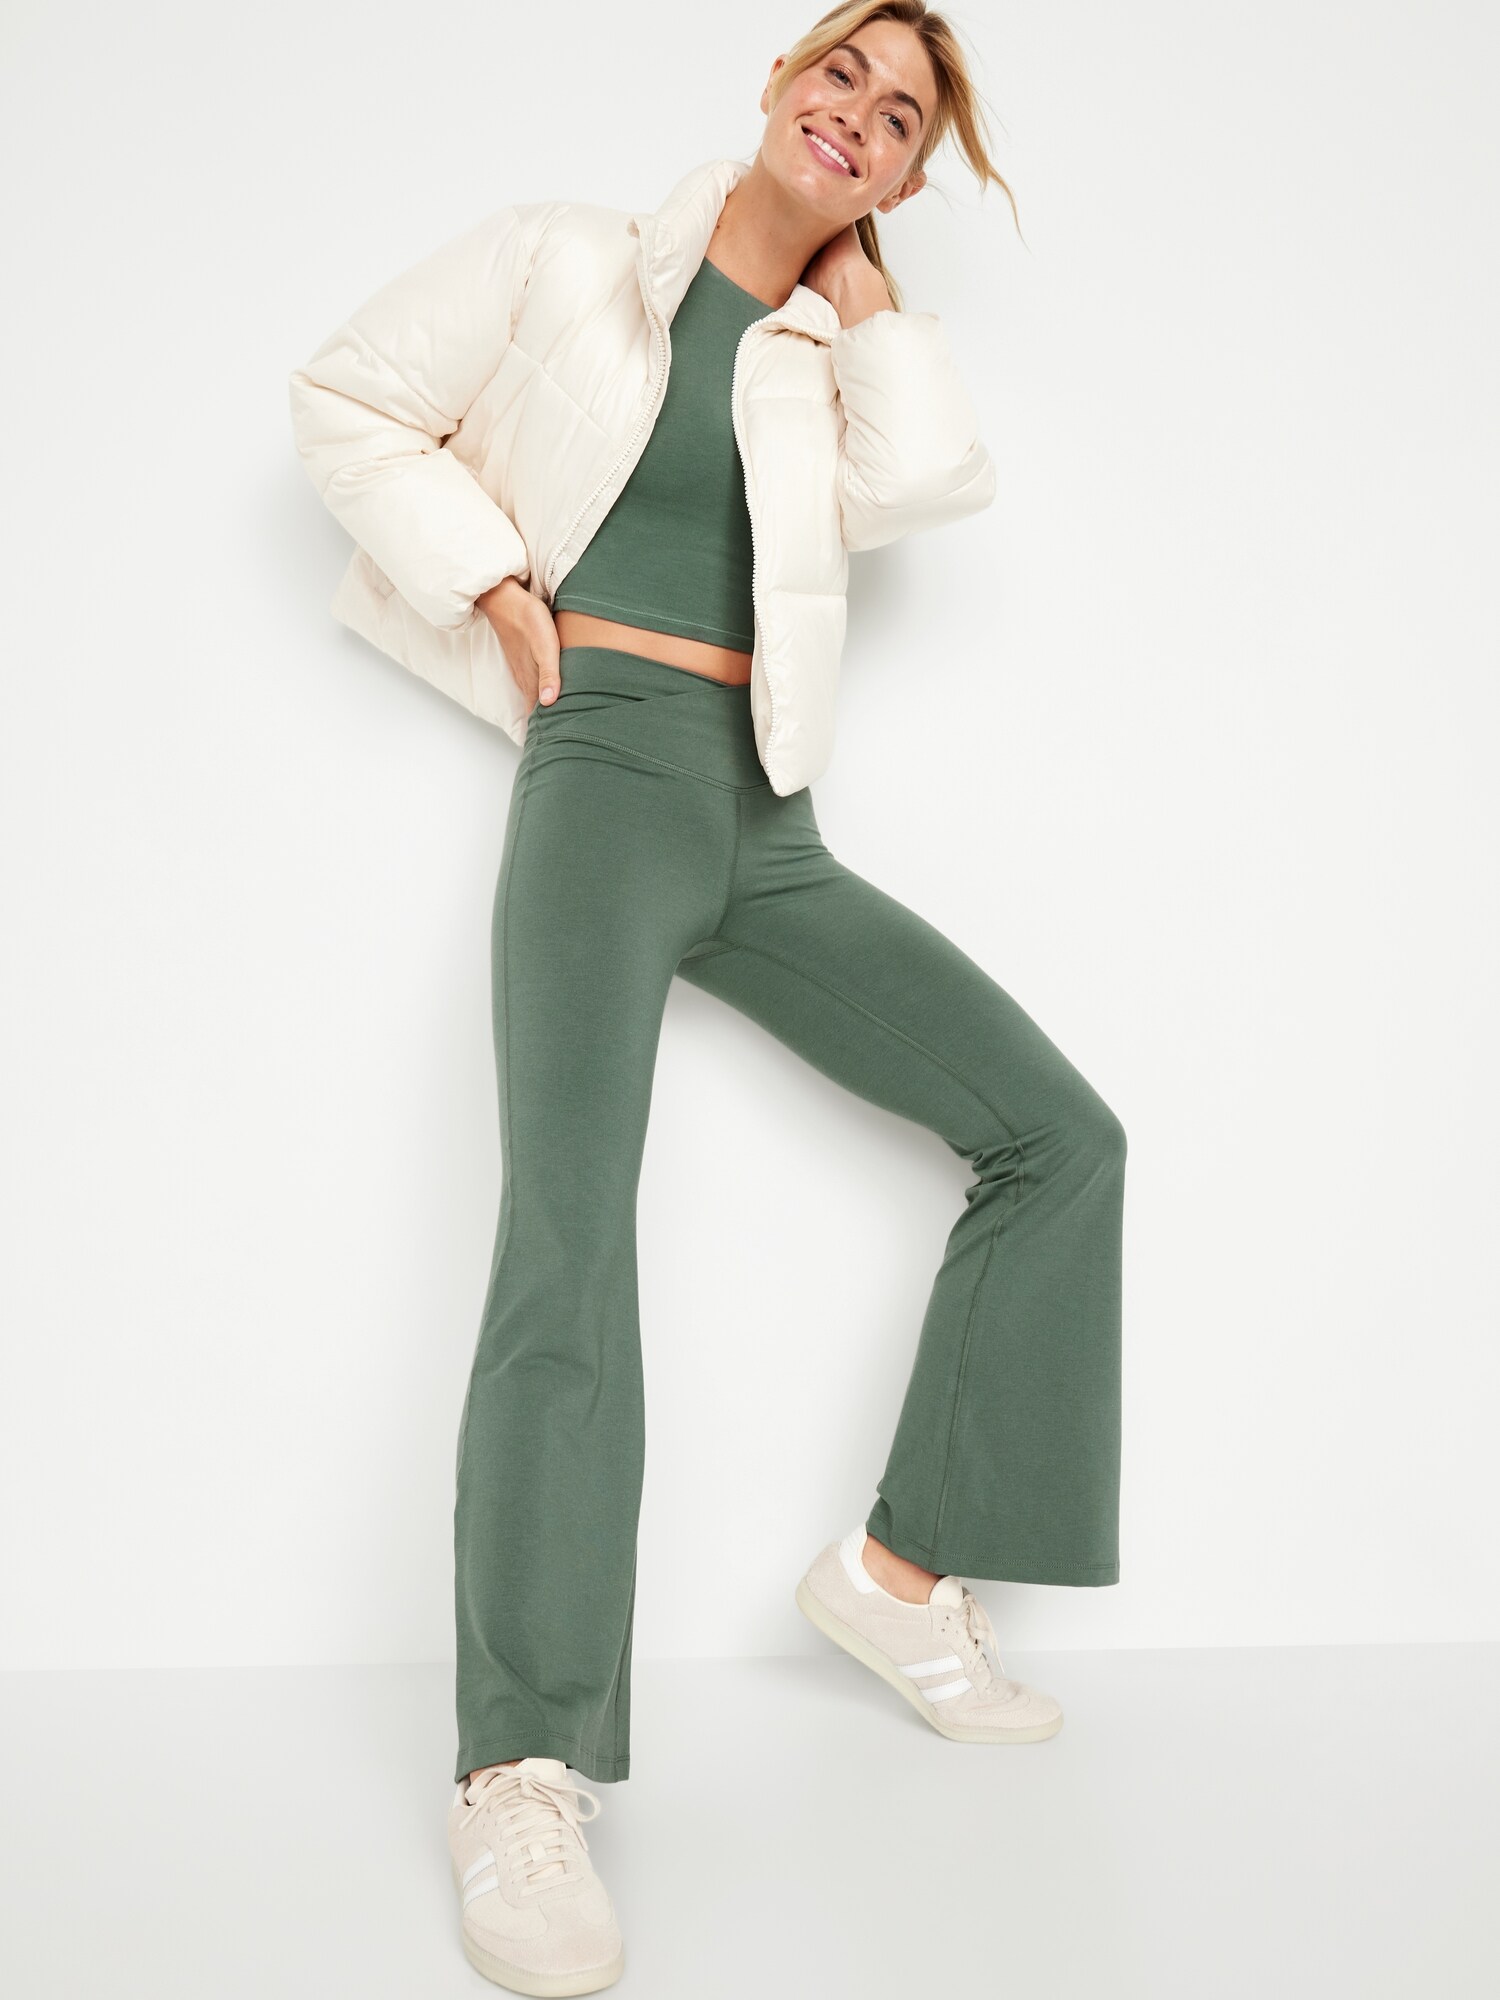 Super High Waisted Flare Trouser Pant